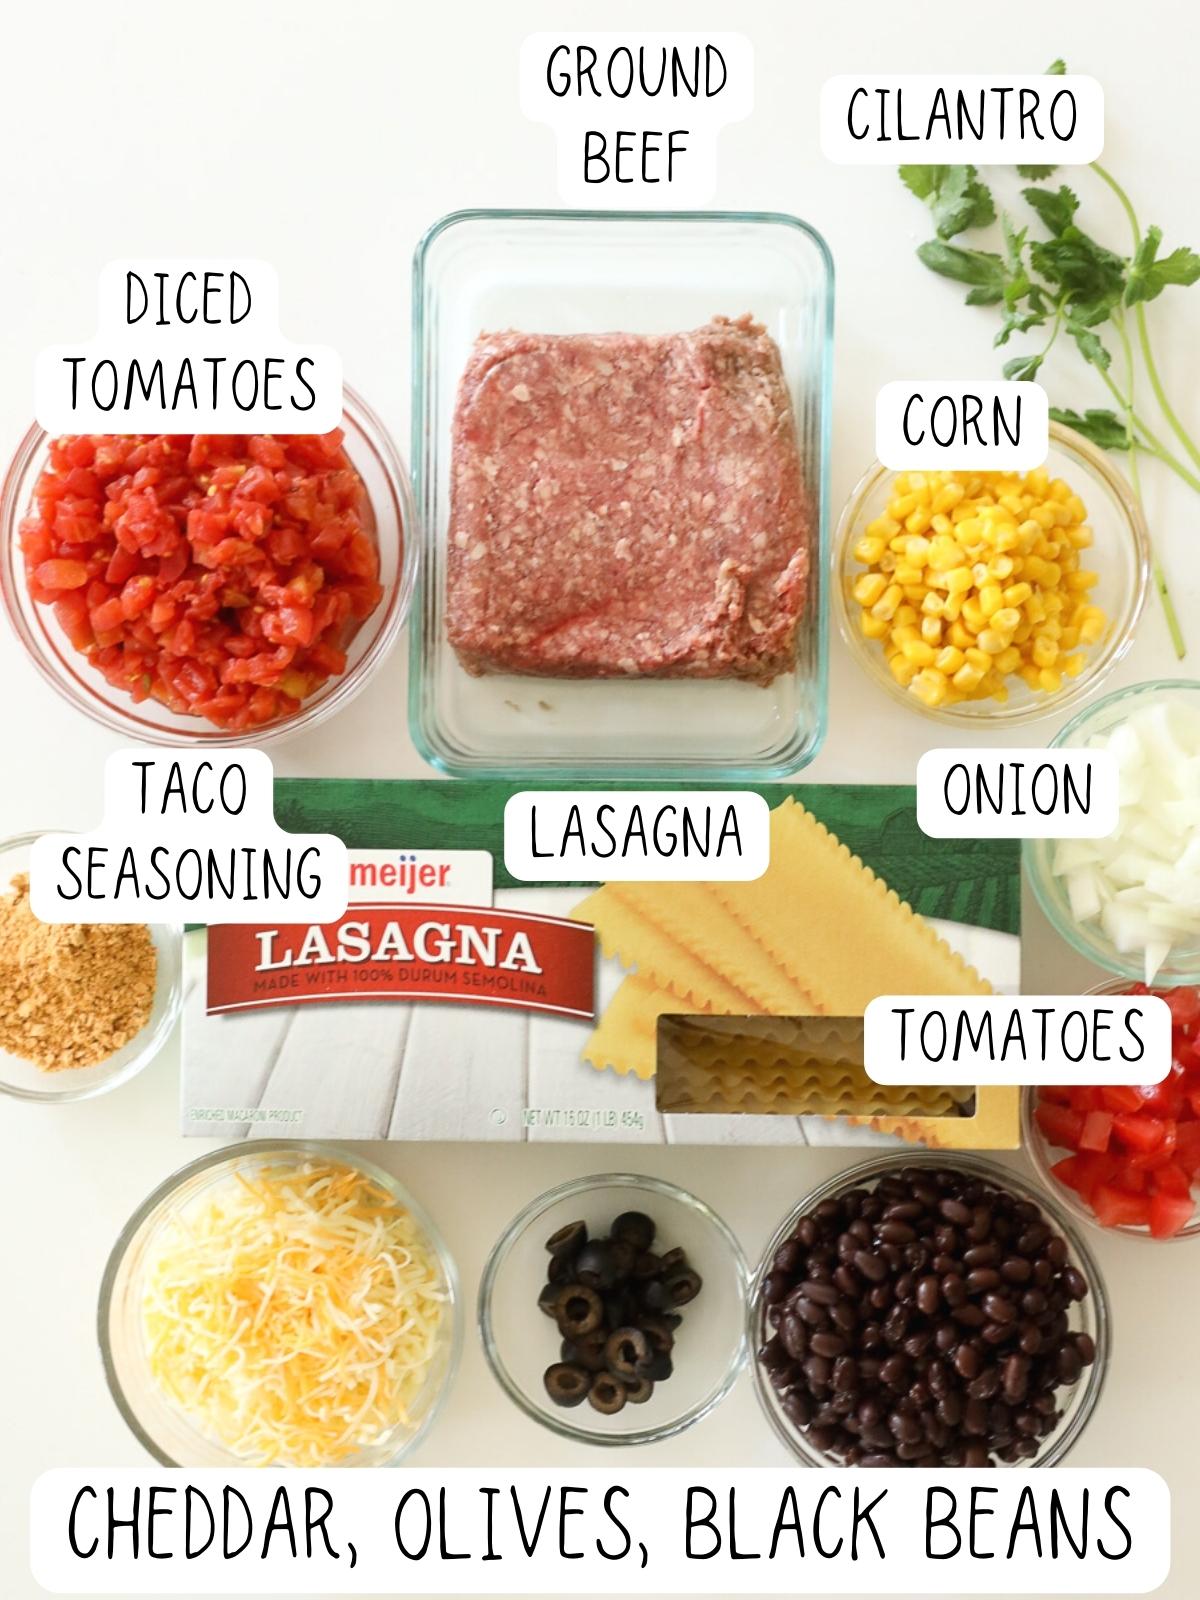 ingredients for Mexican lasagna recipe, including corn, diced tomatoes, cilantro, ground beef, lasagna noodles, taco seasoning and black beans